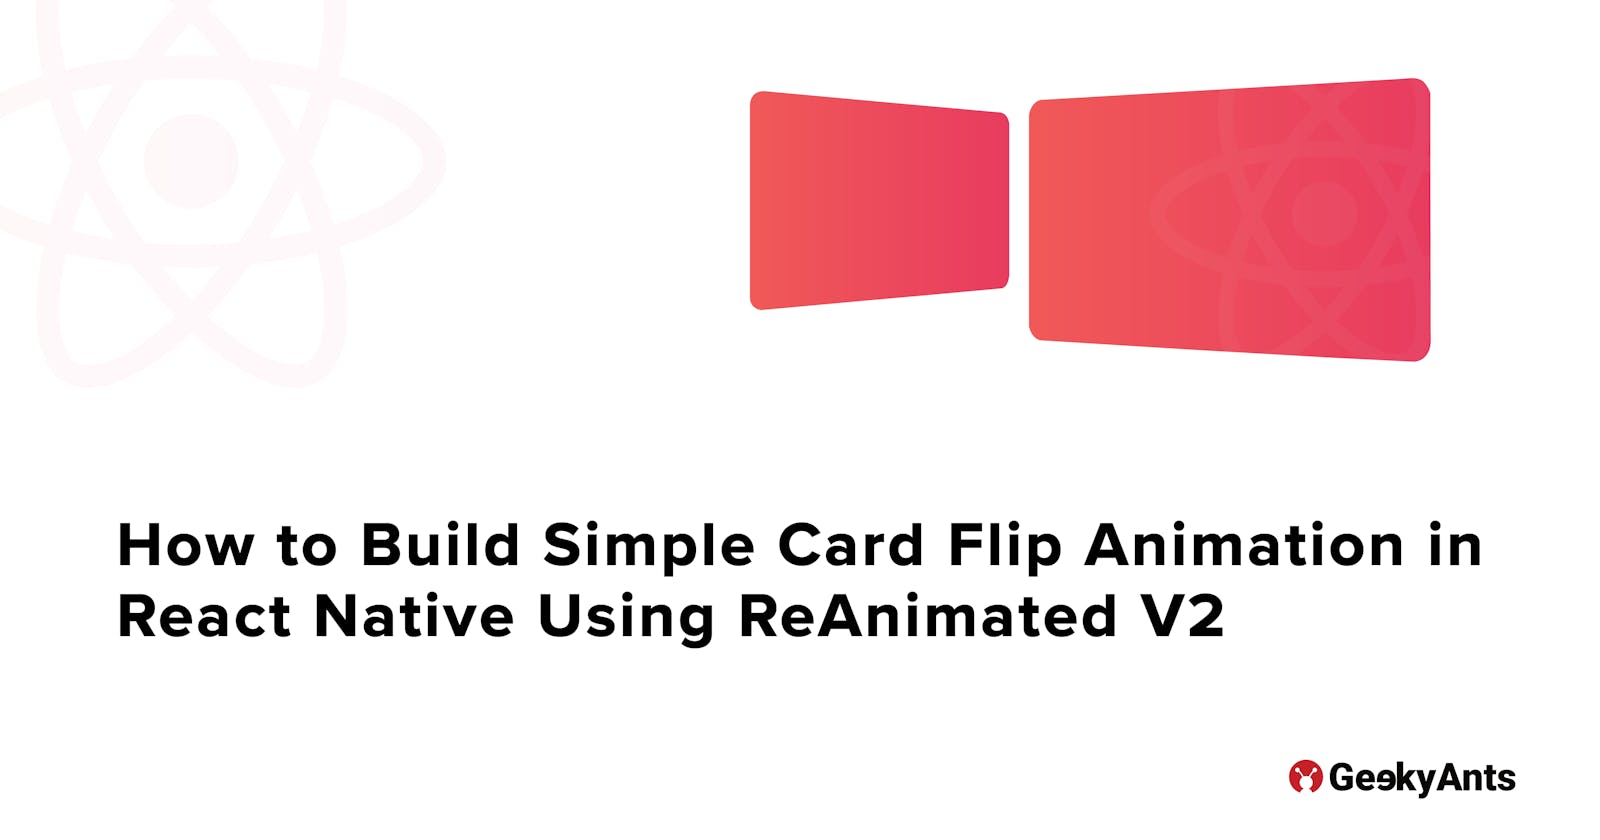 How to Build Simple Card Flip Animation in React Native Using ReAnimated V2